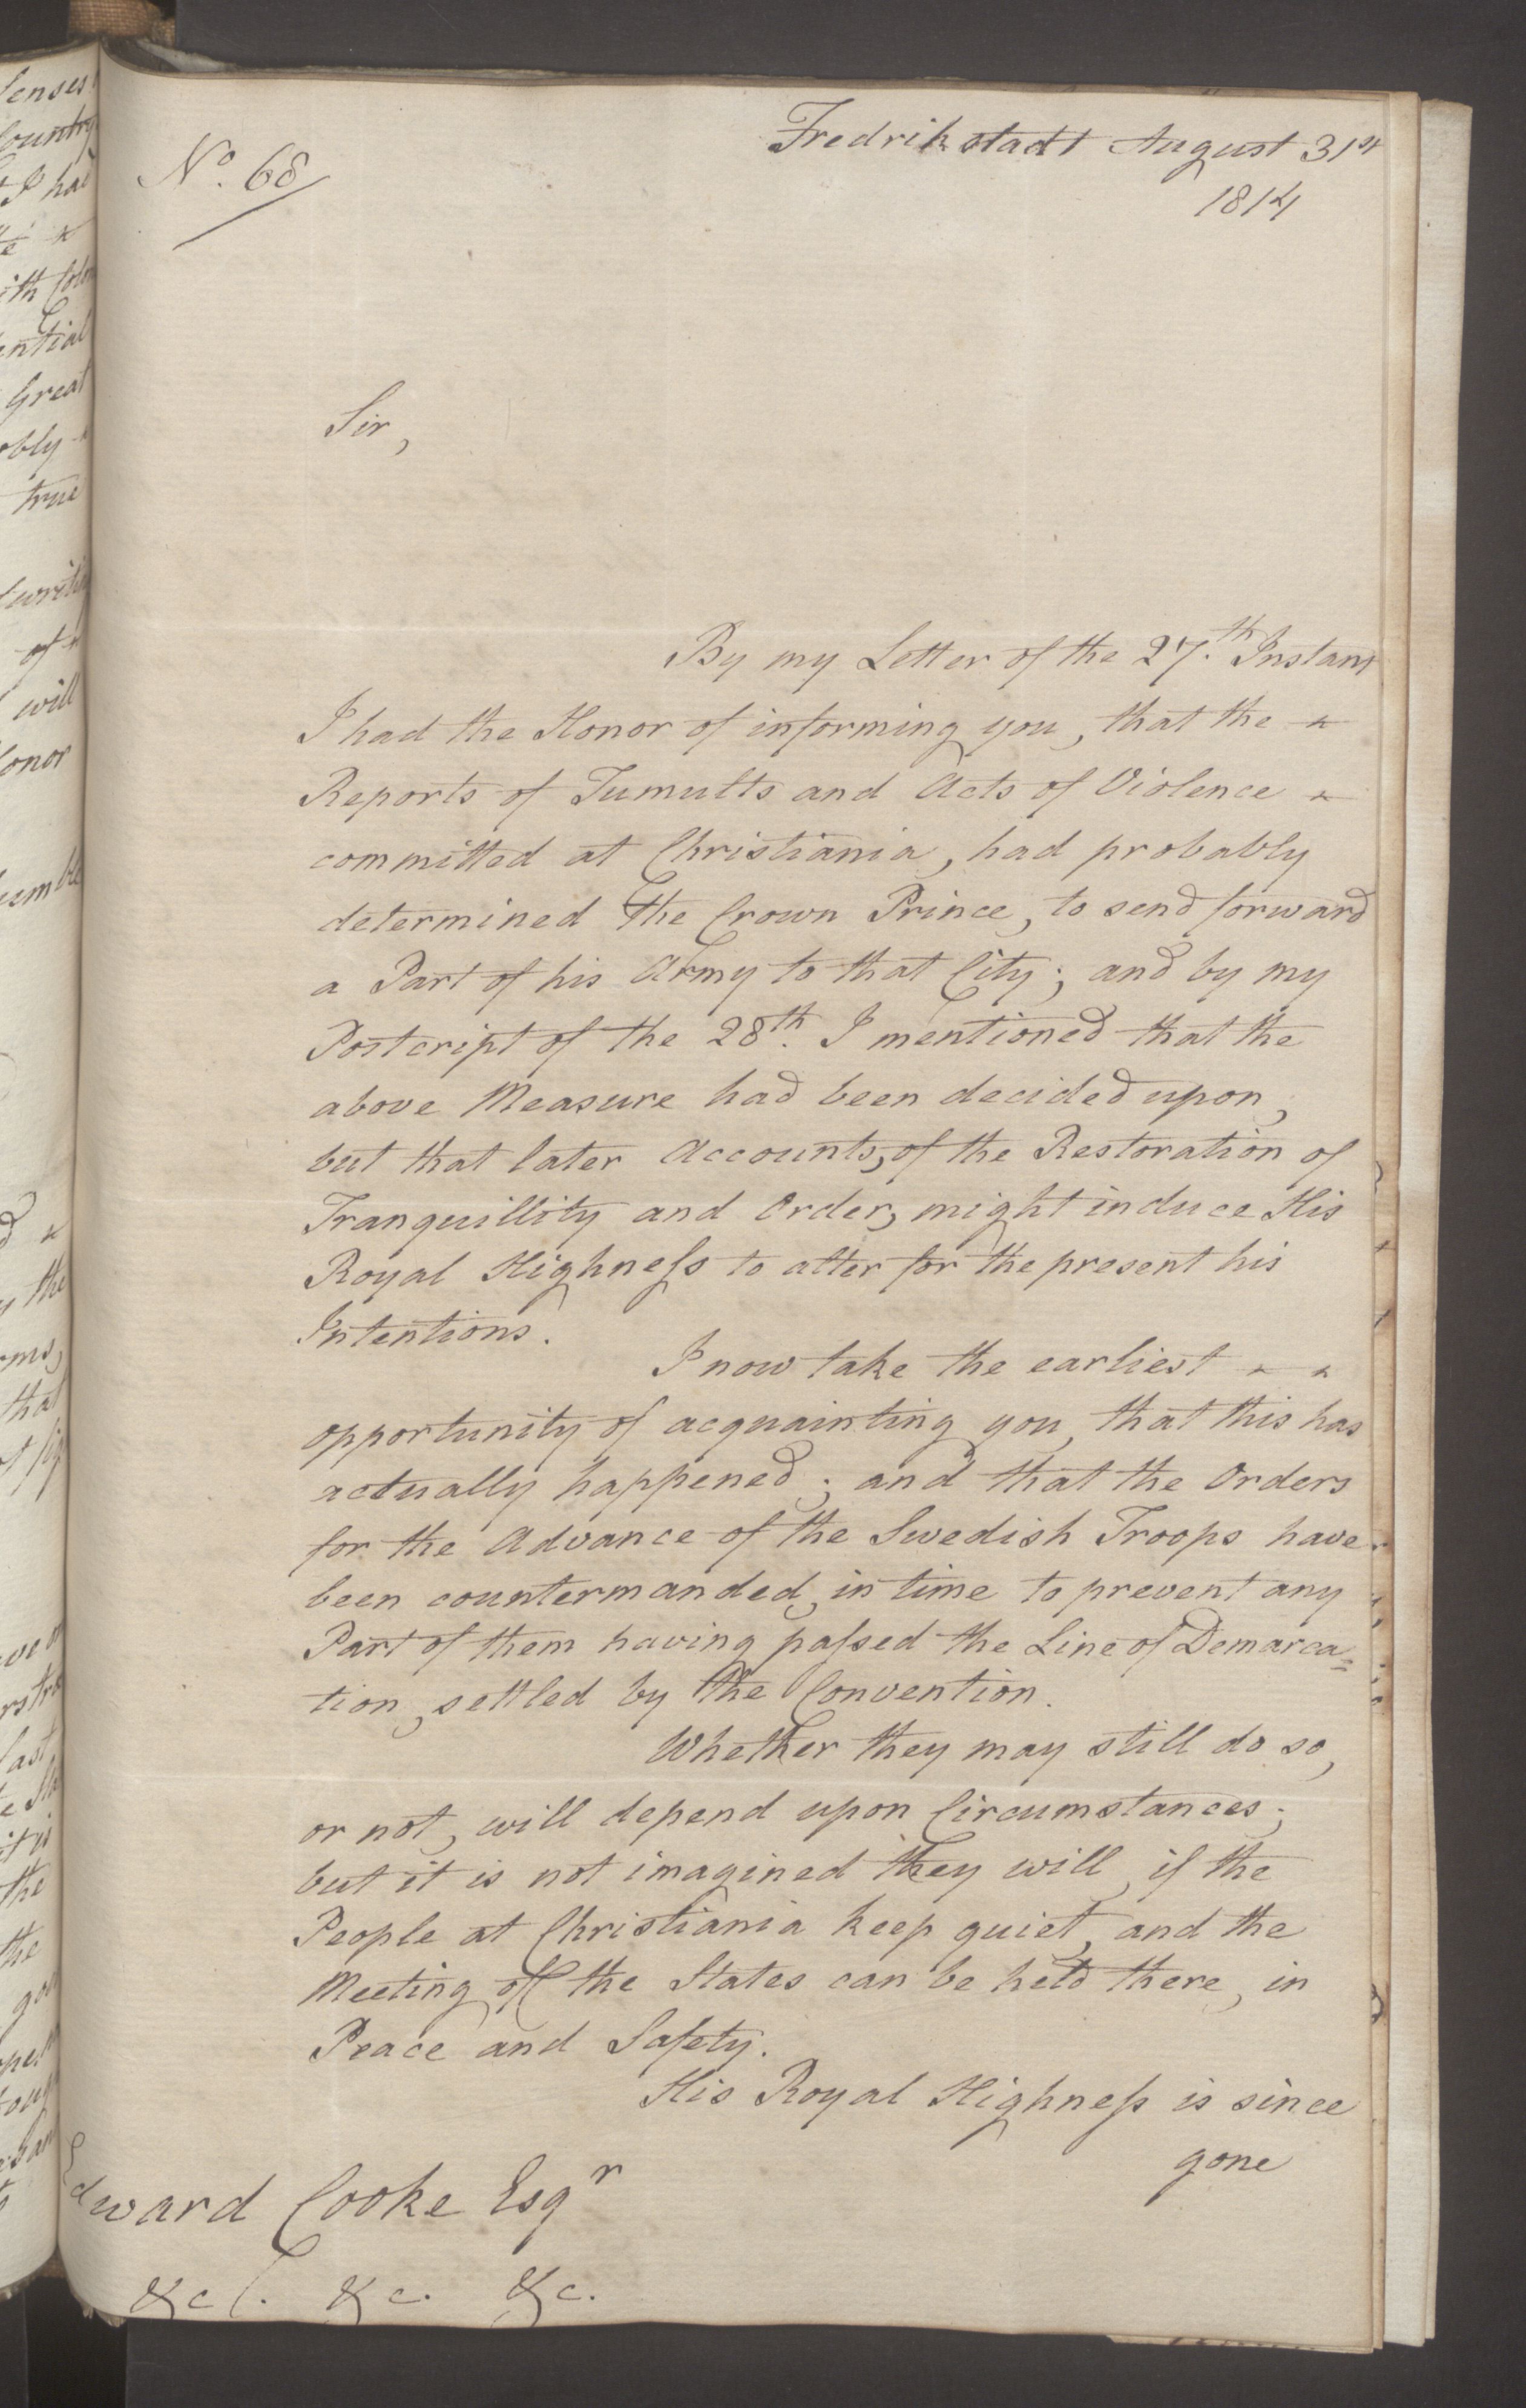 Foreign Office*, UKA/-/FO 38/16: Sir C. Gordon. Reports from Malmö, Jonkoping, and Helsingborg, 1814, p. 103